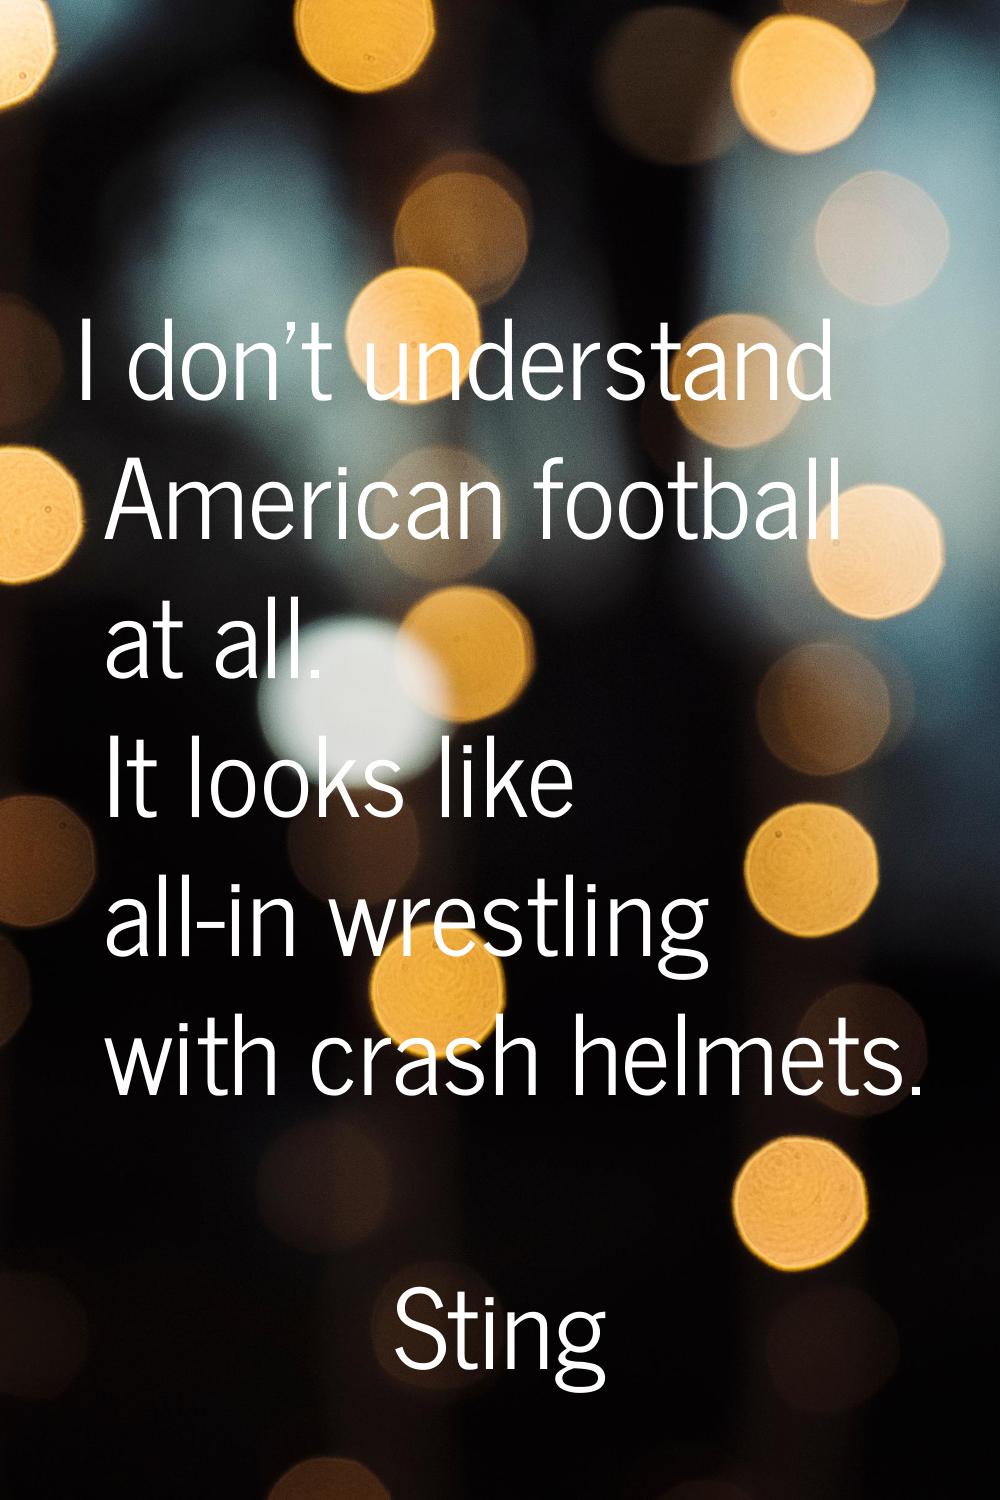 I don't understand American football at all. It looks like all-in wrestling with crash helmets.